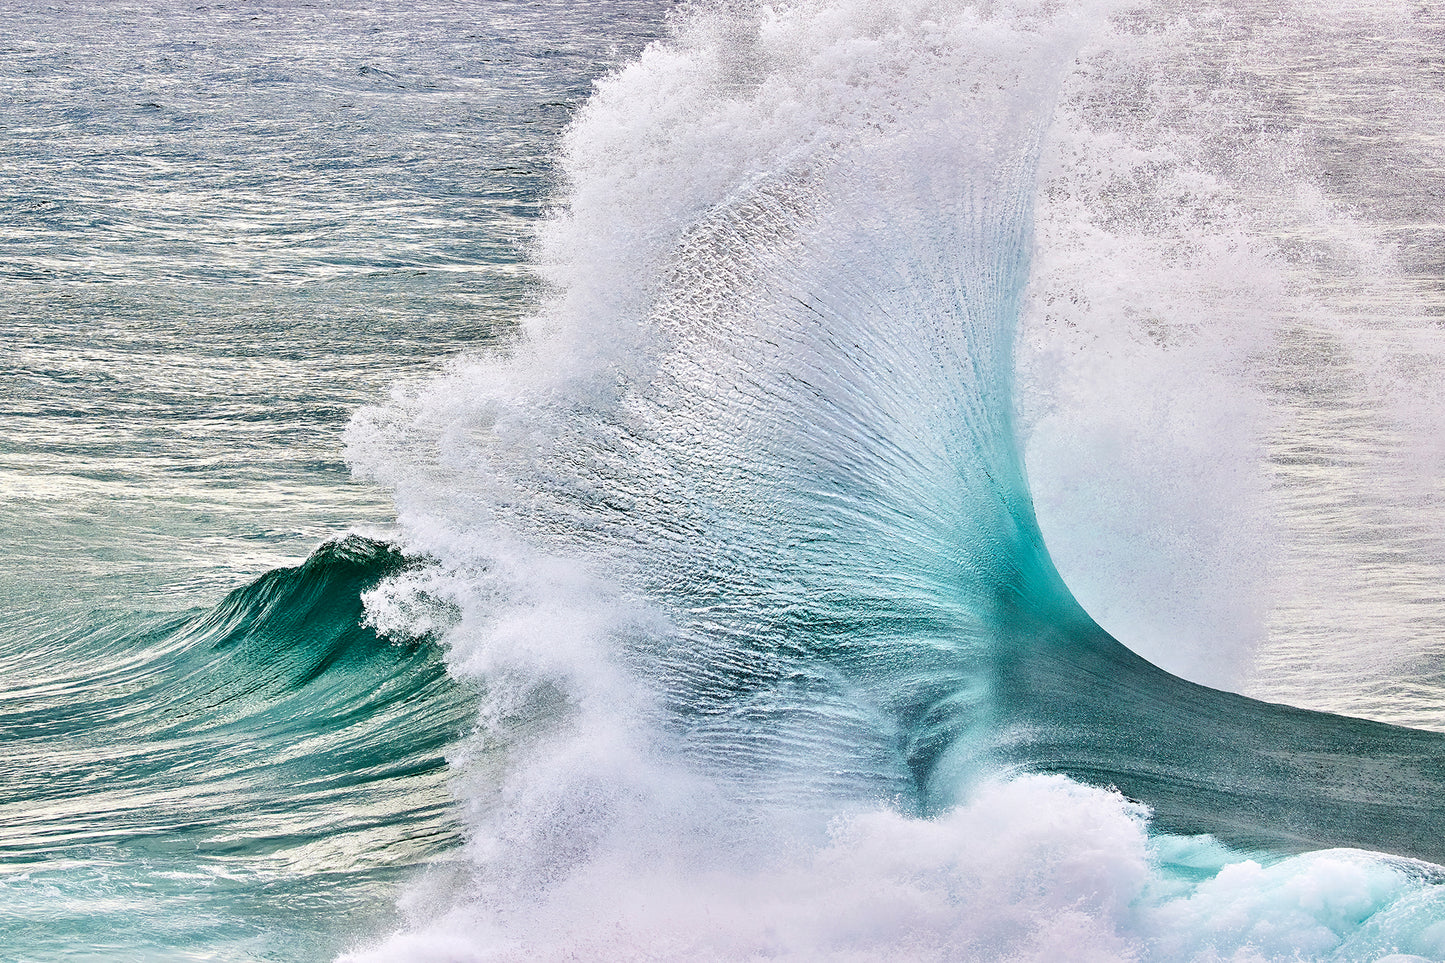 Fish tail - Breaking wave at Fingal Head, NSW